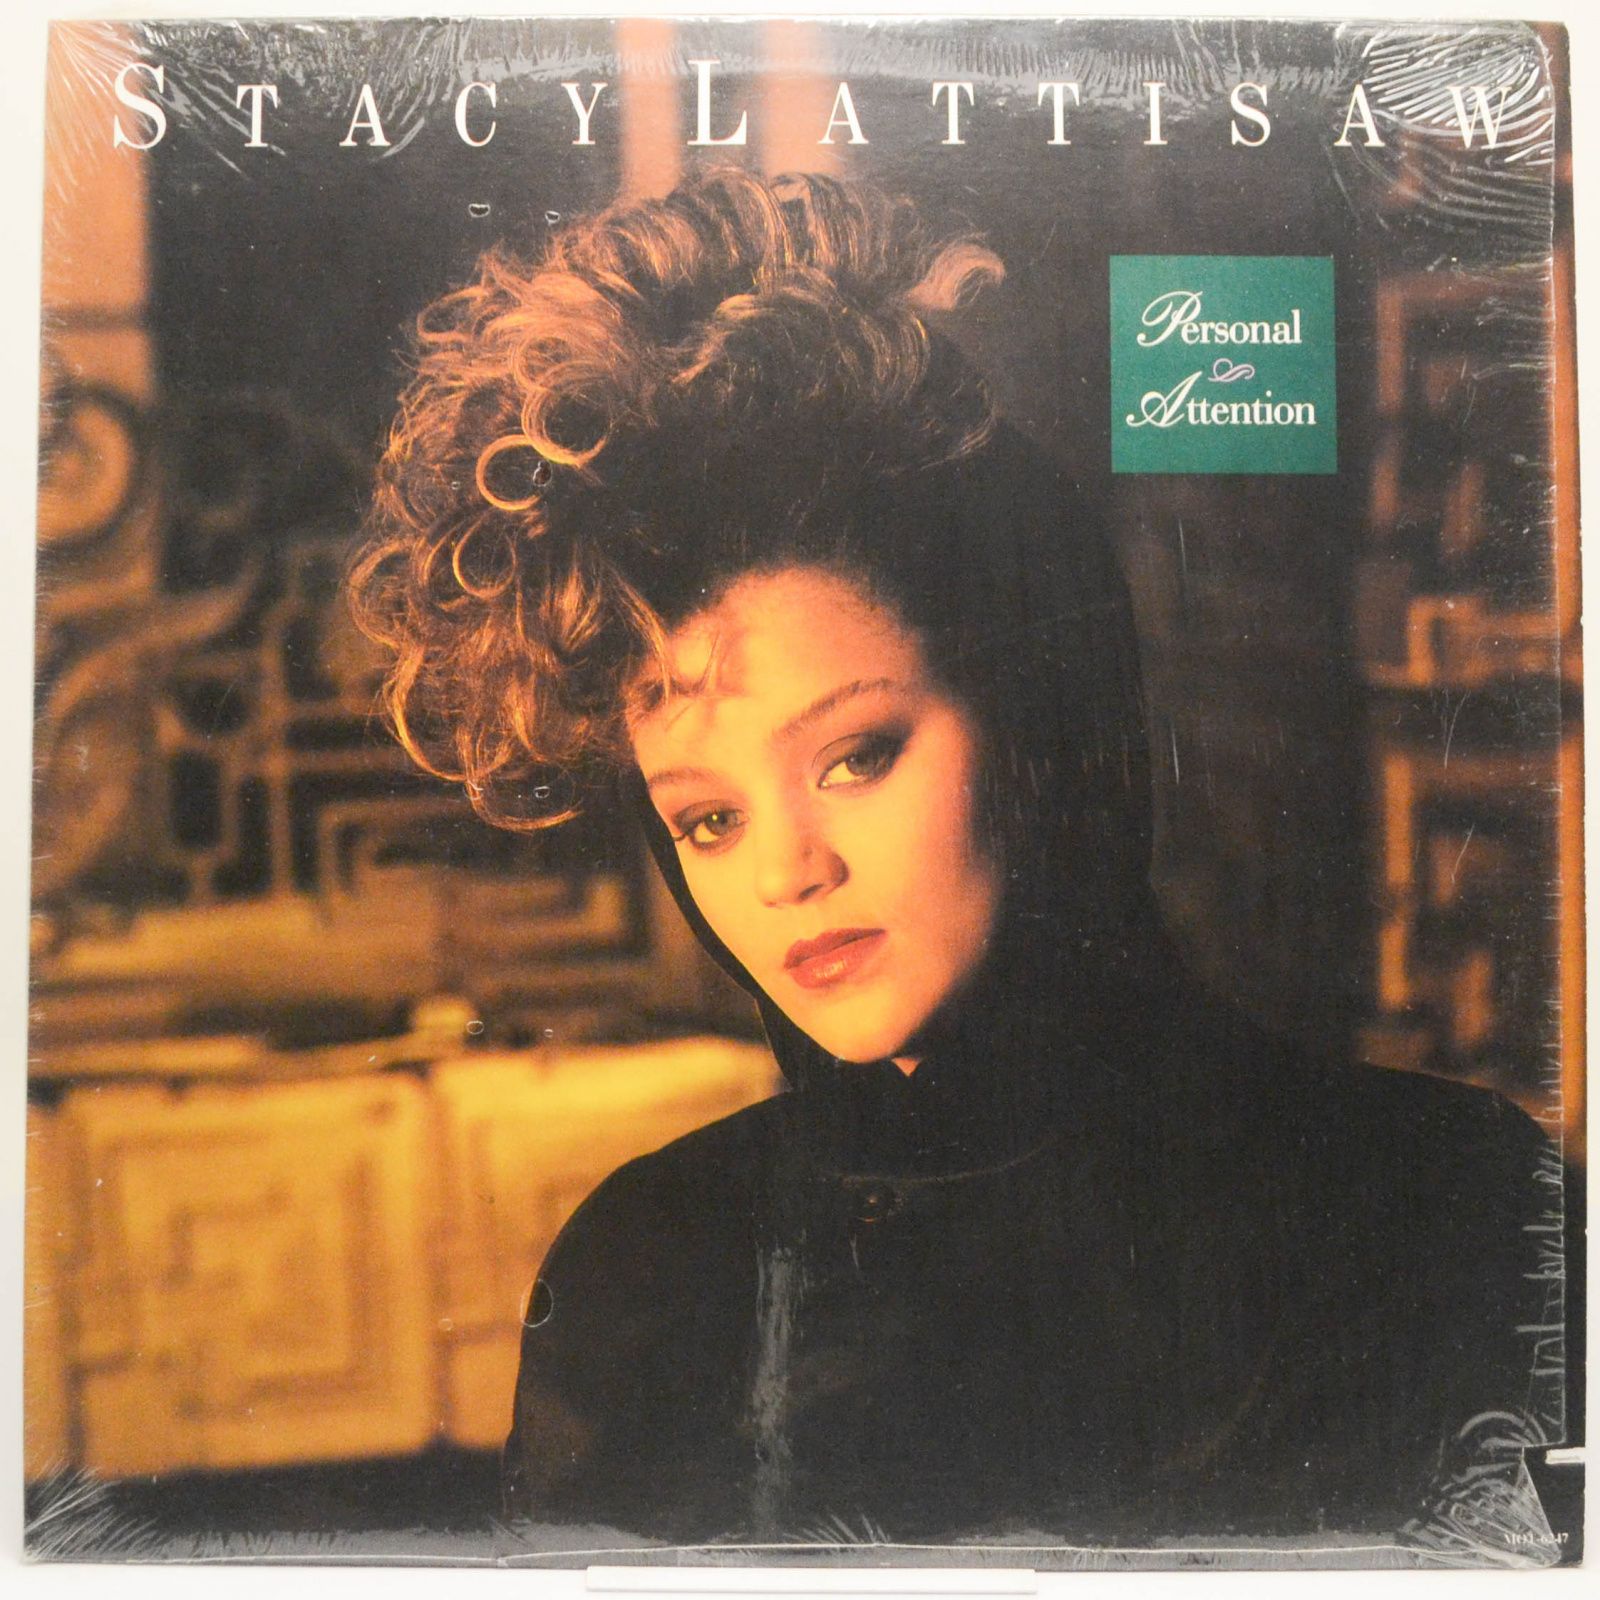 Stacy Lattisaw — Personal Attention, 1988